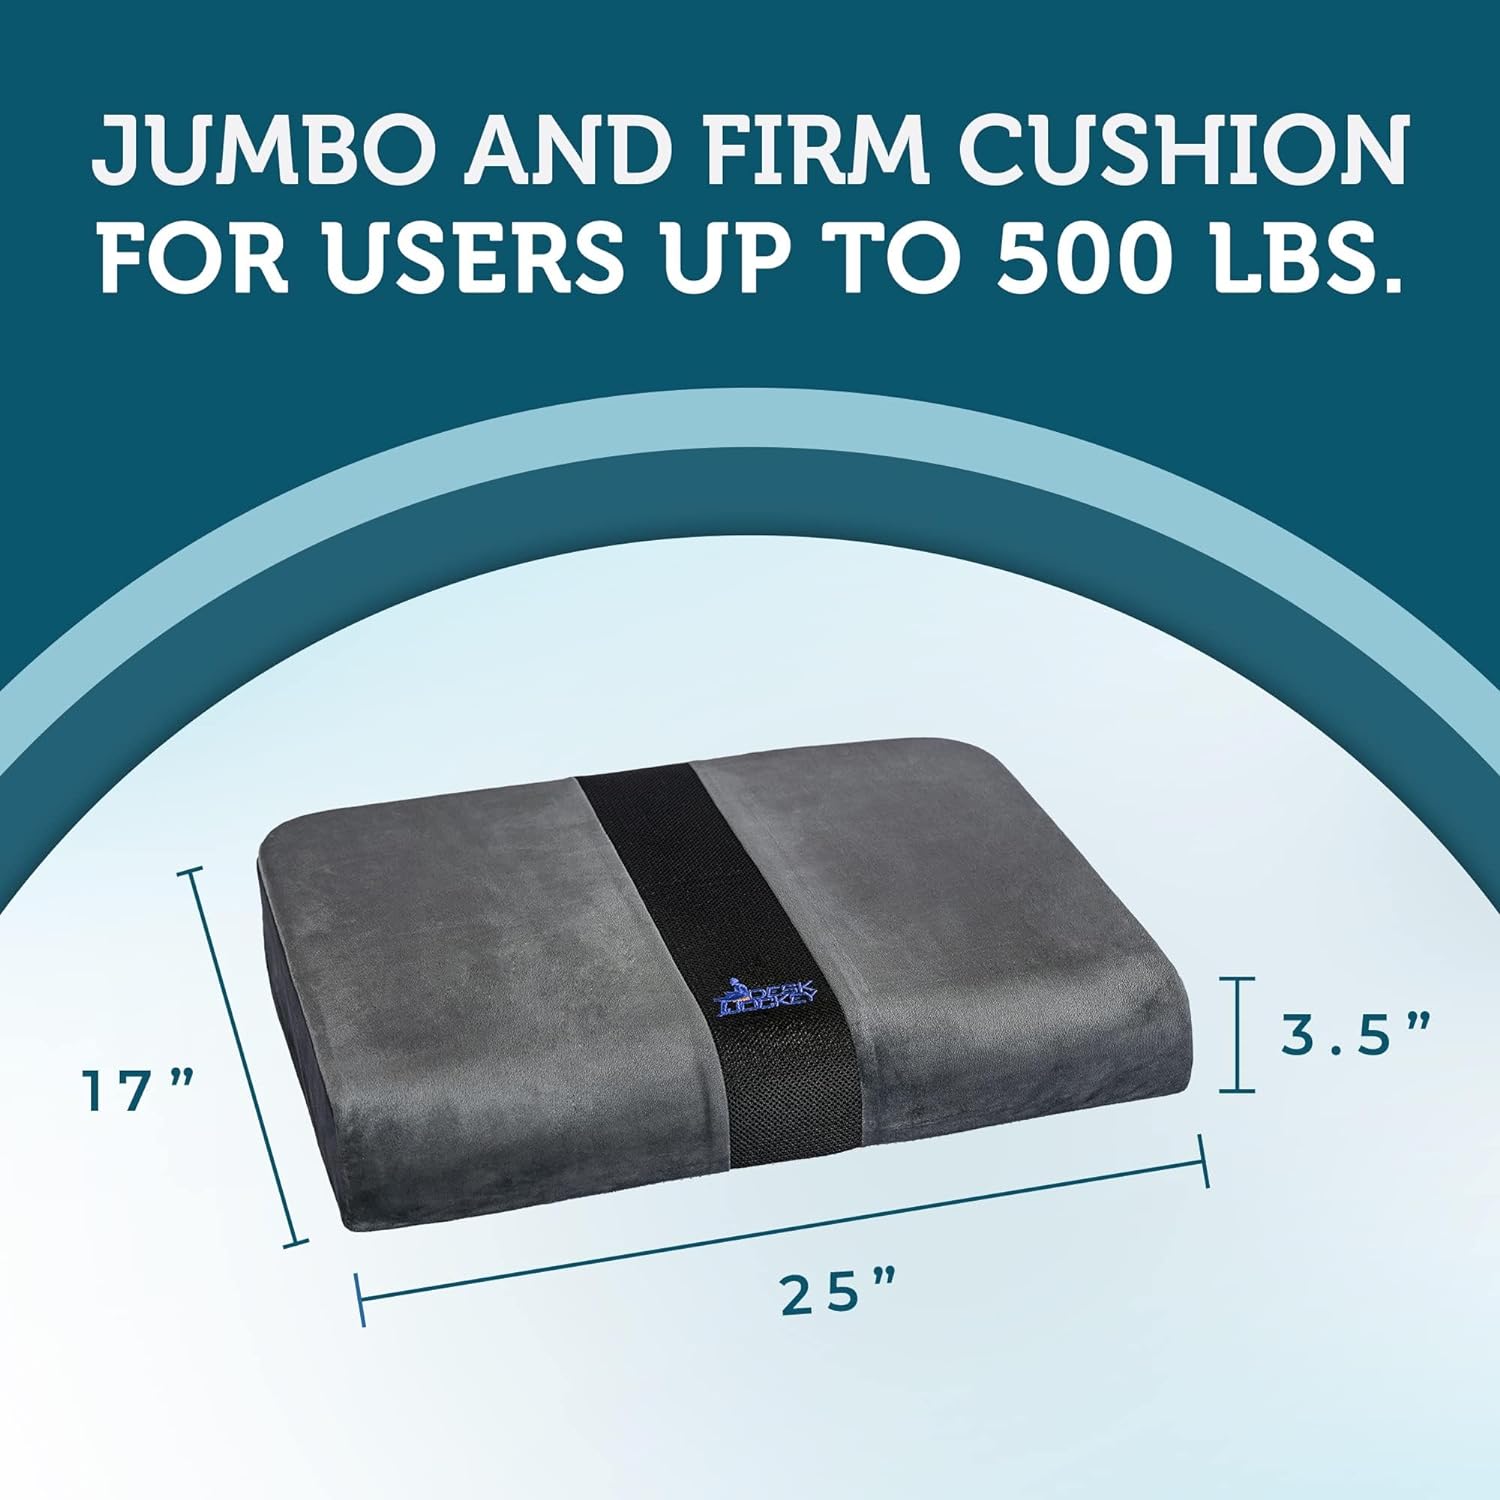 2X Large Extra Wide Seat Cushion for Wheelchairs & Office Chairs - Jumbo and Firm Wheelchair Cushion for Users 300 to 500lbs (25") - Proprietary Blended Memory Foam Relieves Sciatica, Tailbone and Back Pain